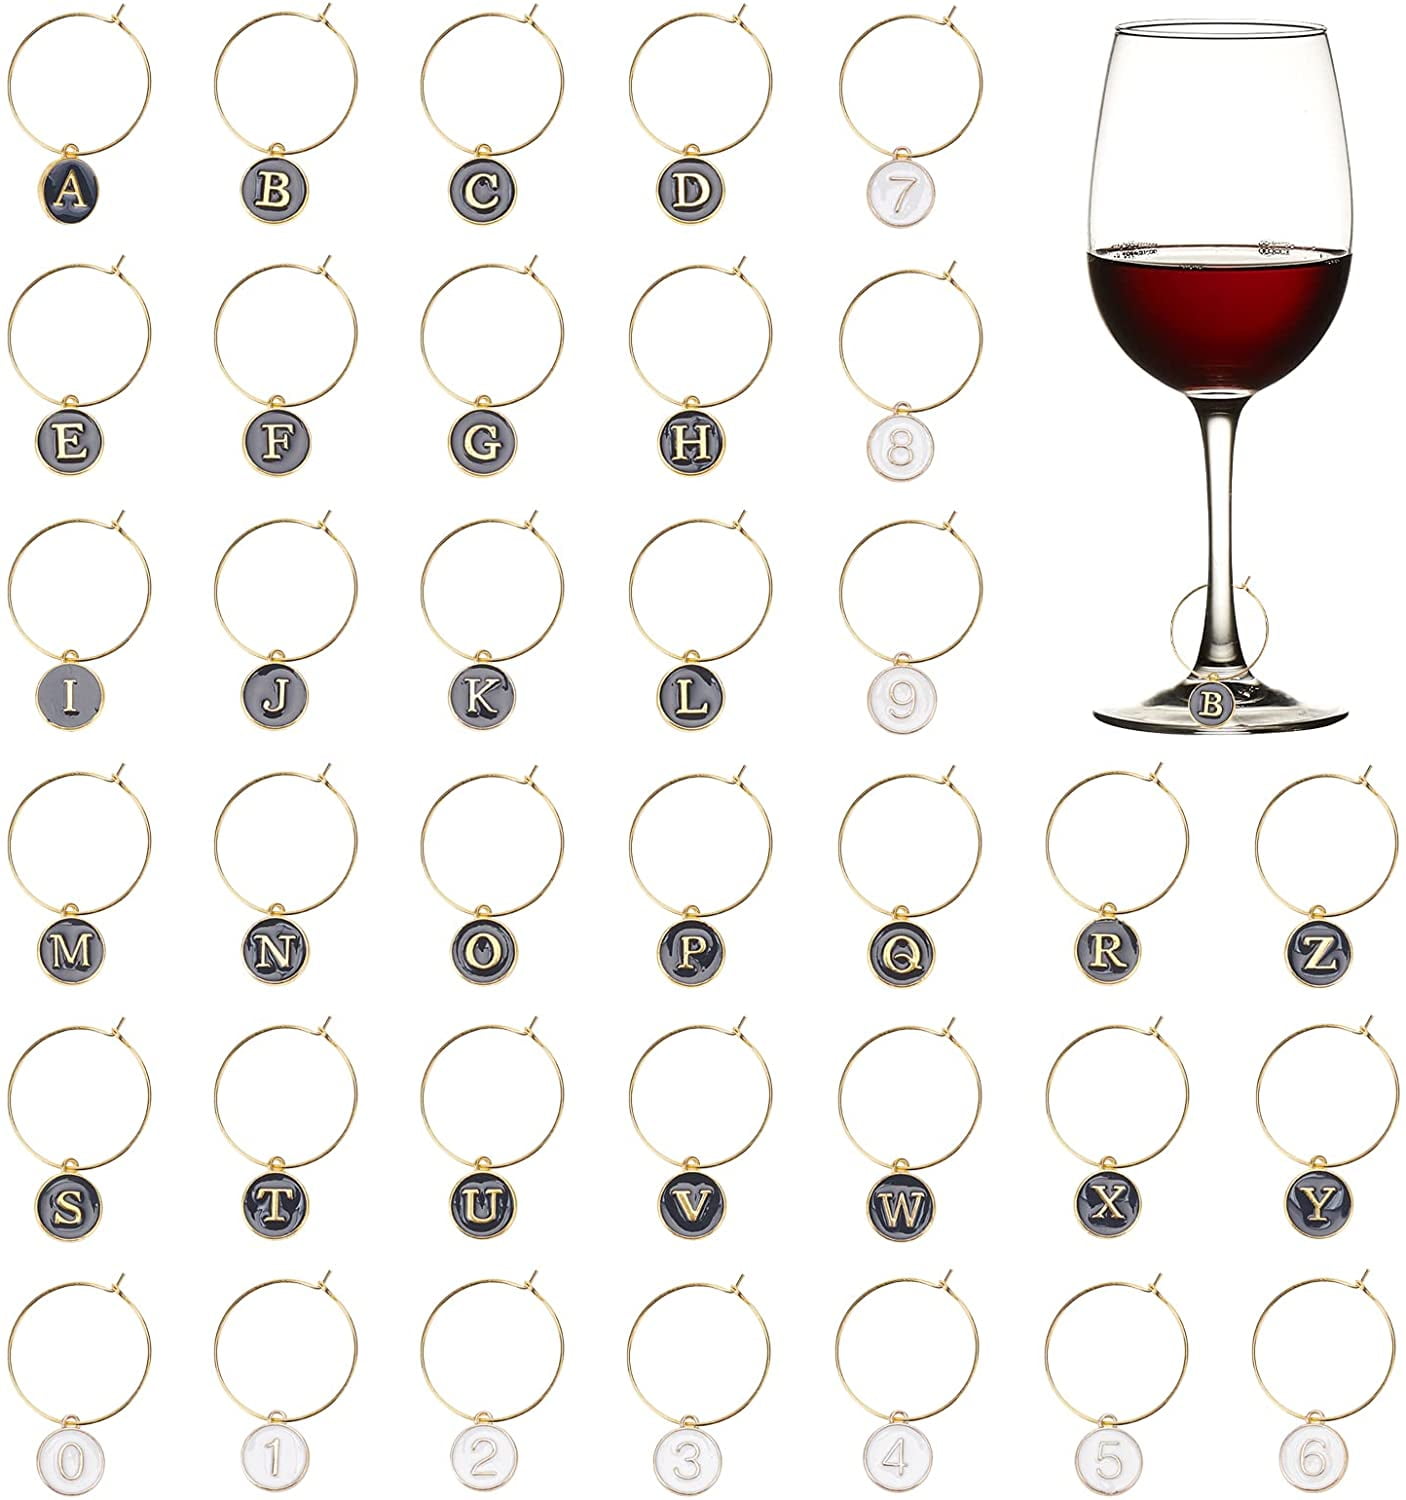 Hicarer 26 Pieces Wine Charms for Stem Glasses with Rings Tags Metal  Letters Glass Charm Markers Letters Beads Markers for Wine Cocktail  Champagne